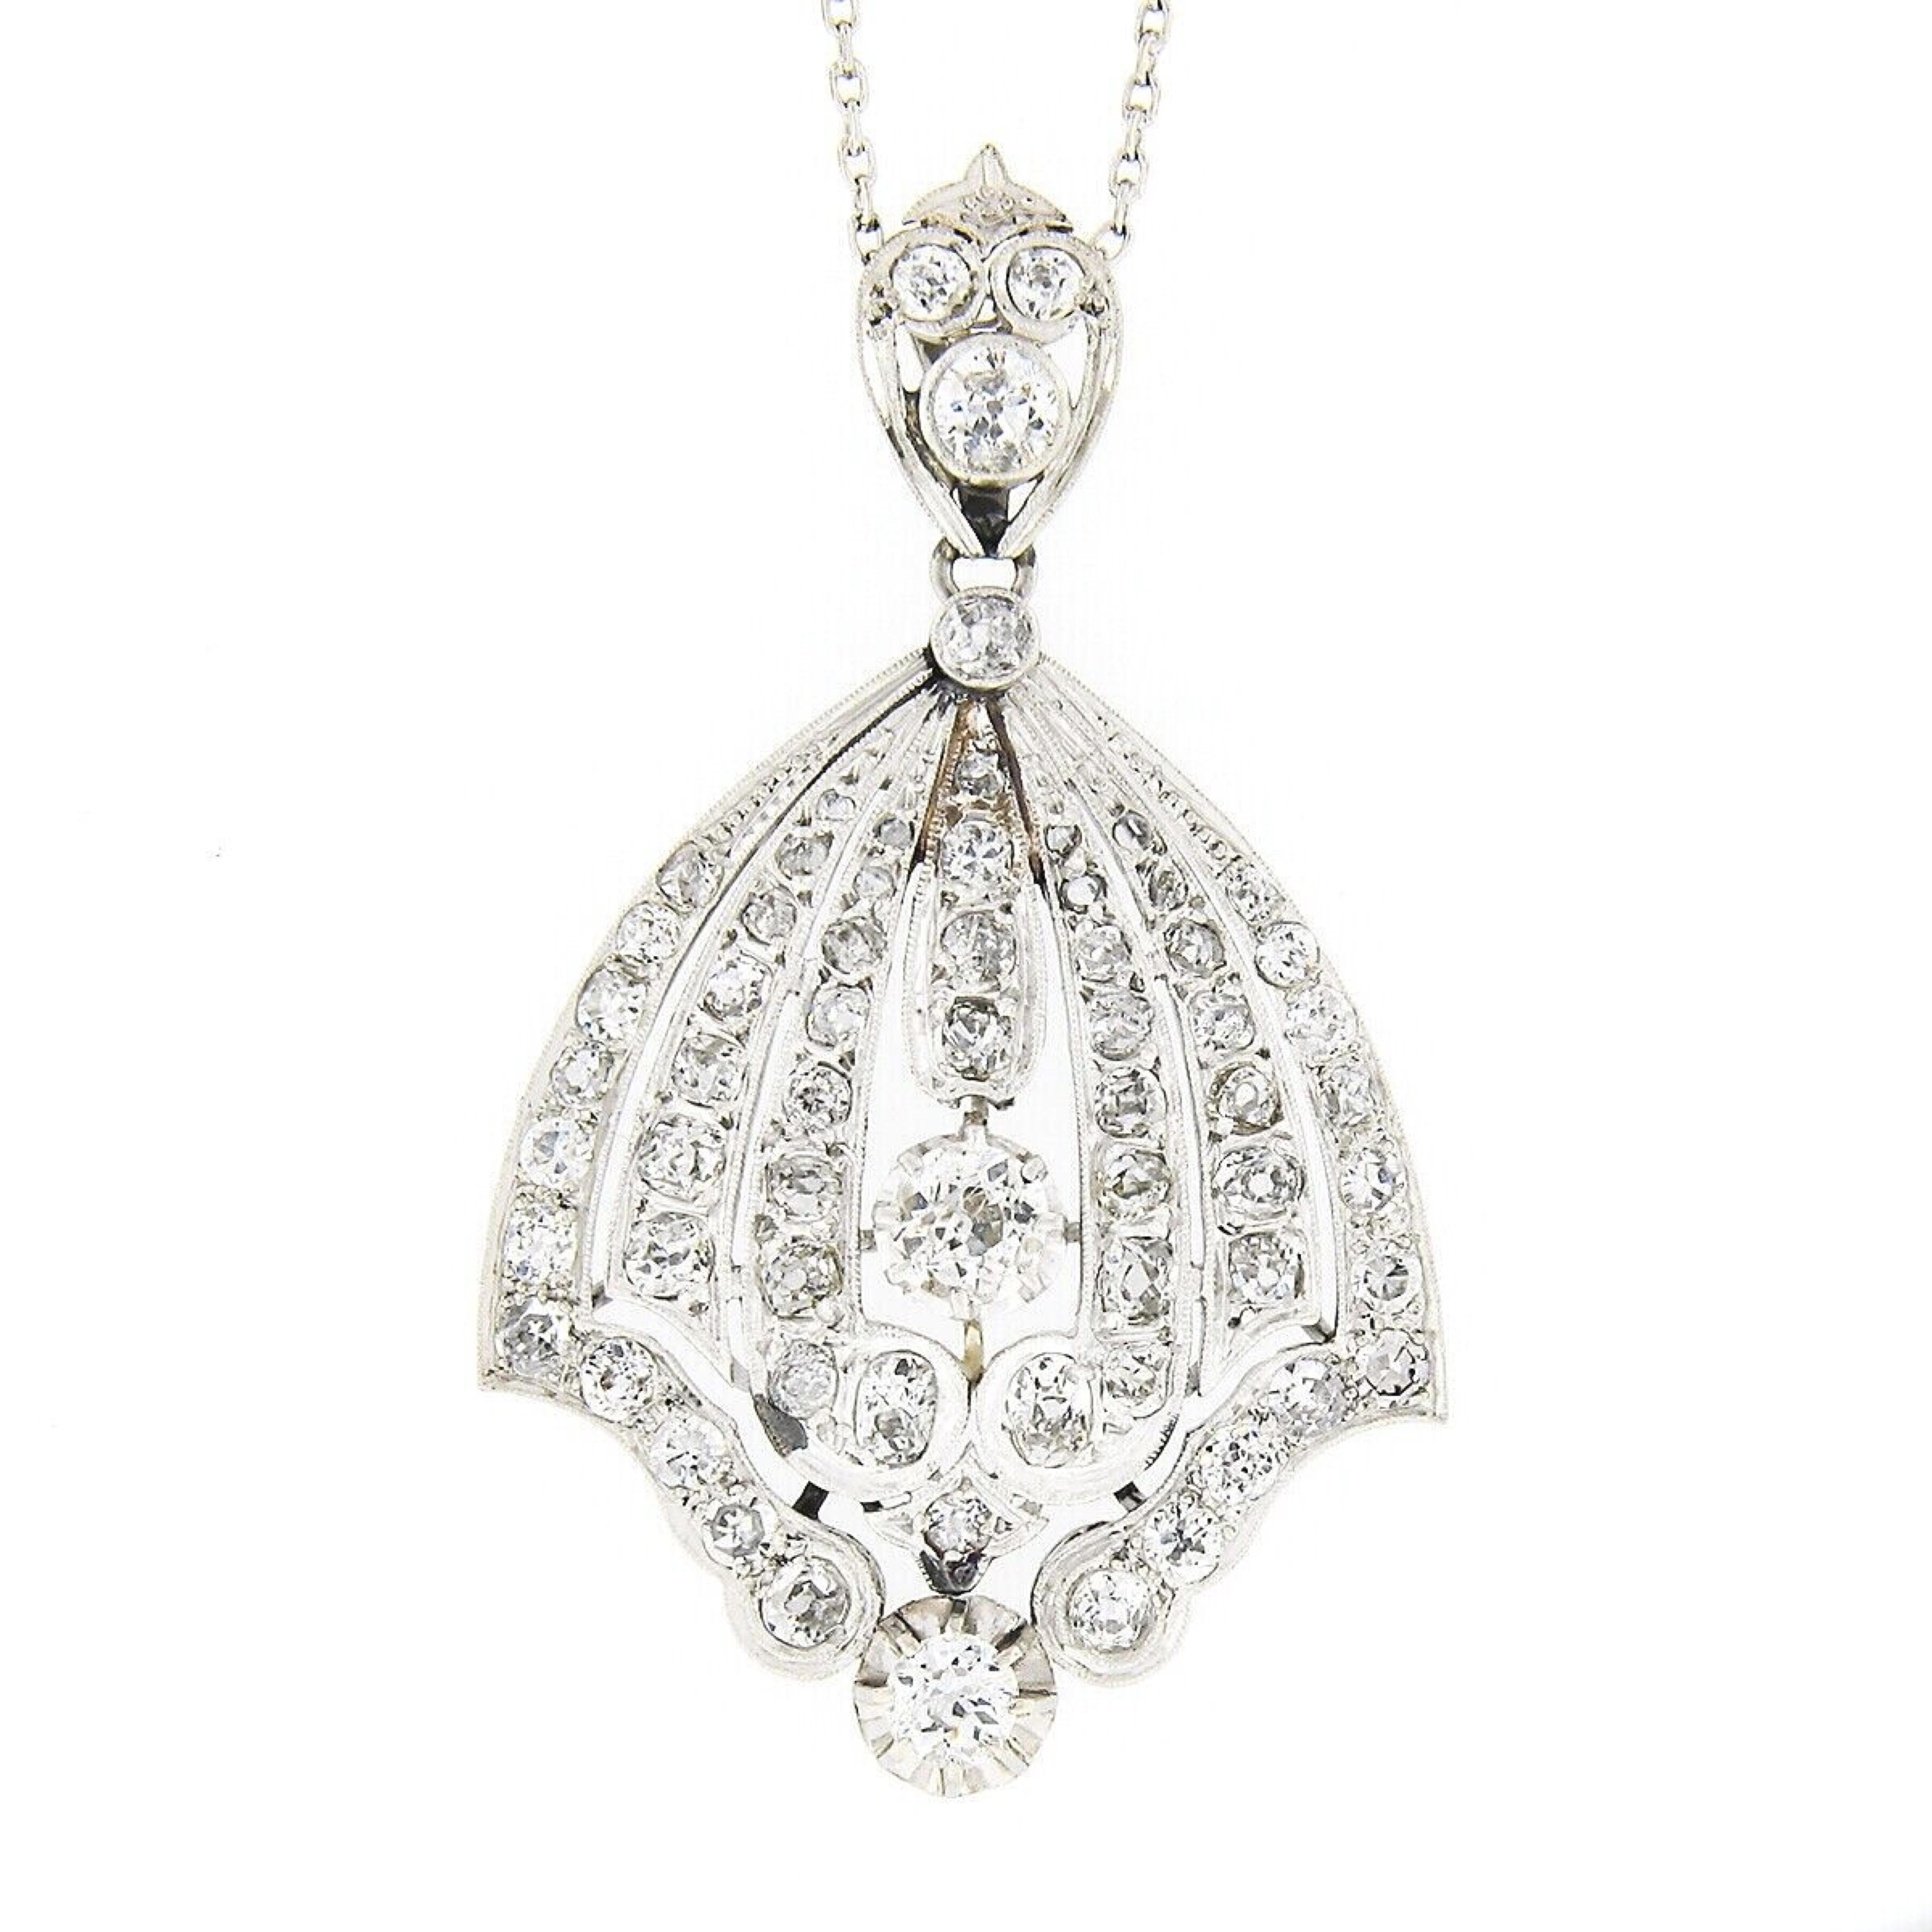 Here we have an absolutely breathtaking antique pendant that was crafted from solid platinum during the Belle Epoque period. This large pendant features an elegant, wide, flared design with subtle open work and is completely drenched in fine